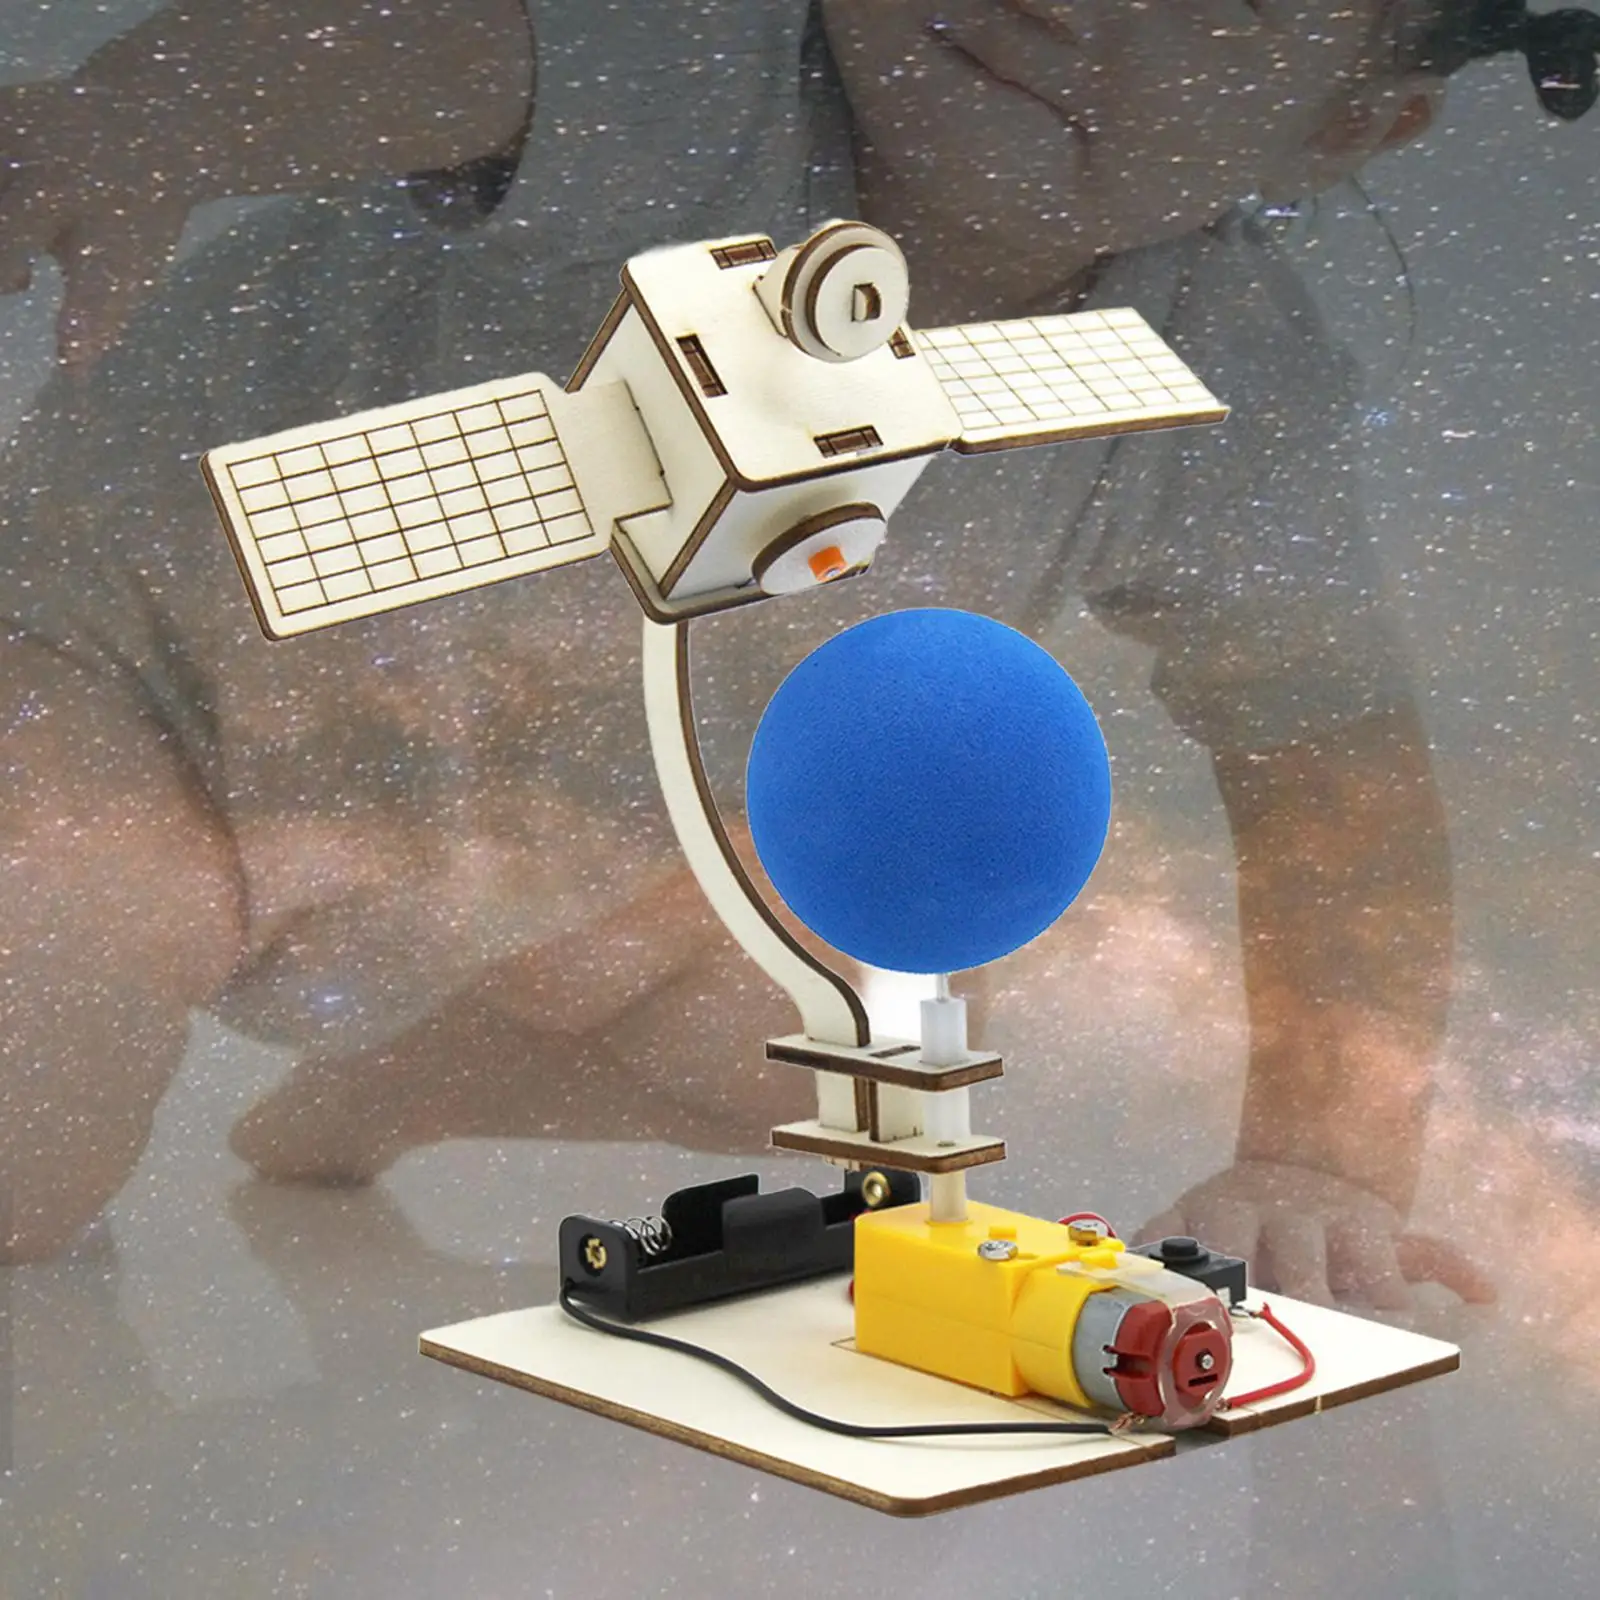 

Wooden Satellite Science Kits DIY Experiment Project for Gift Boys and Girls